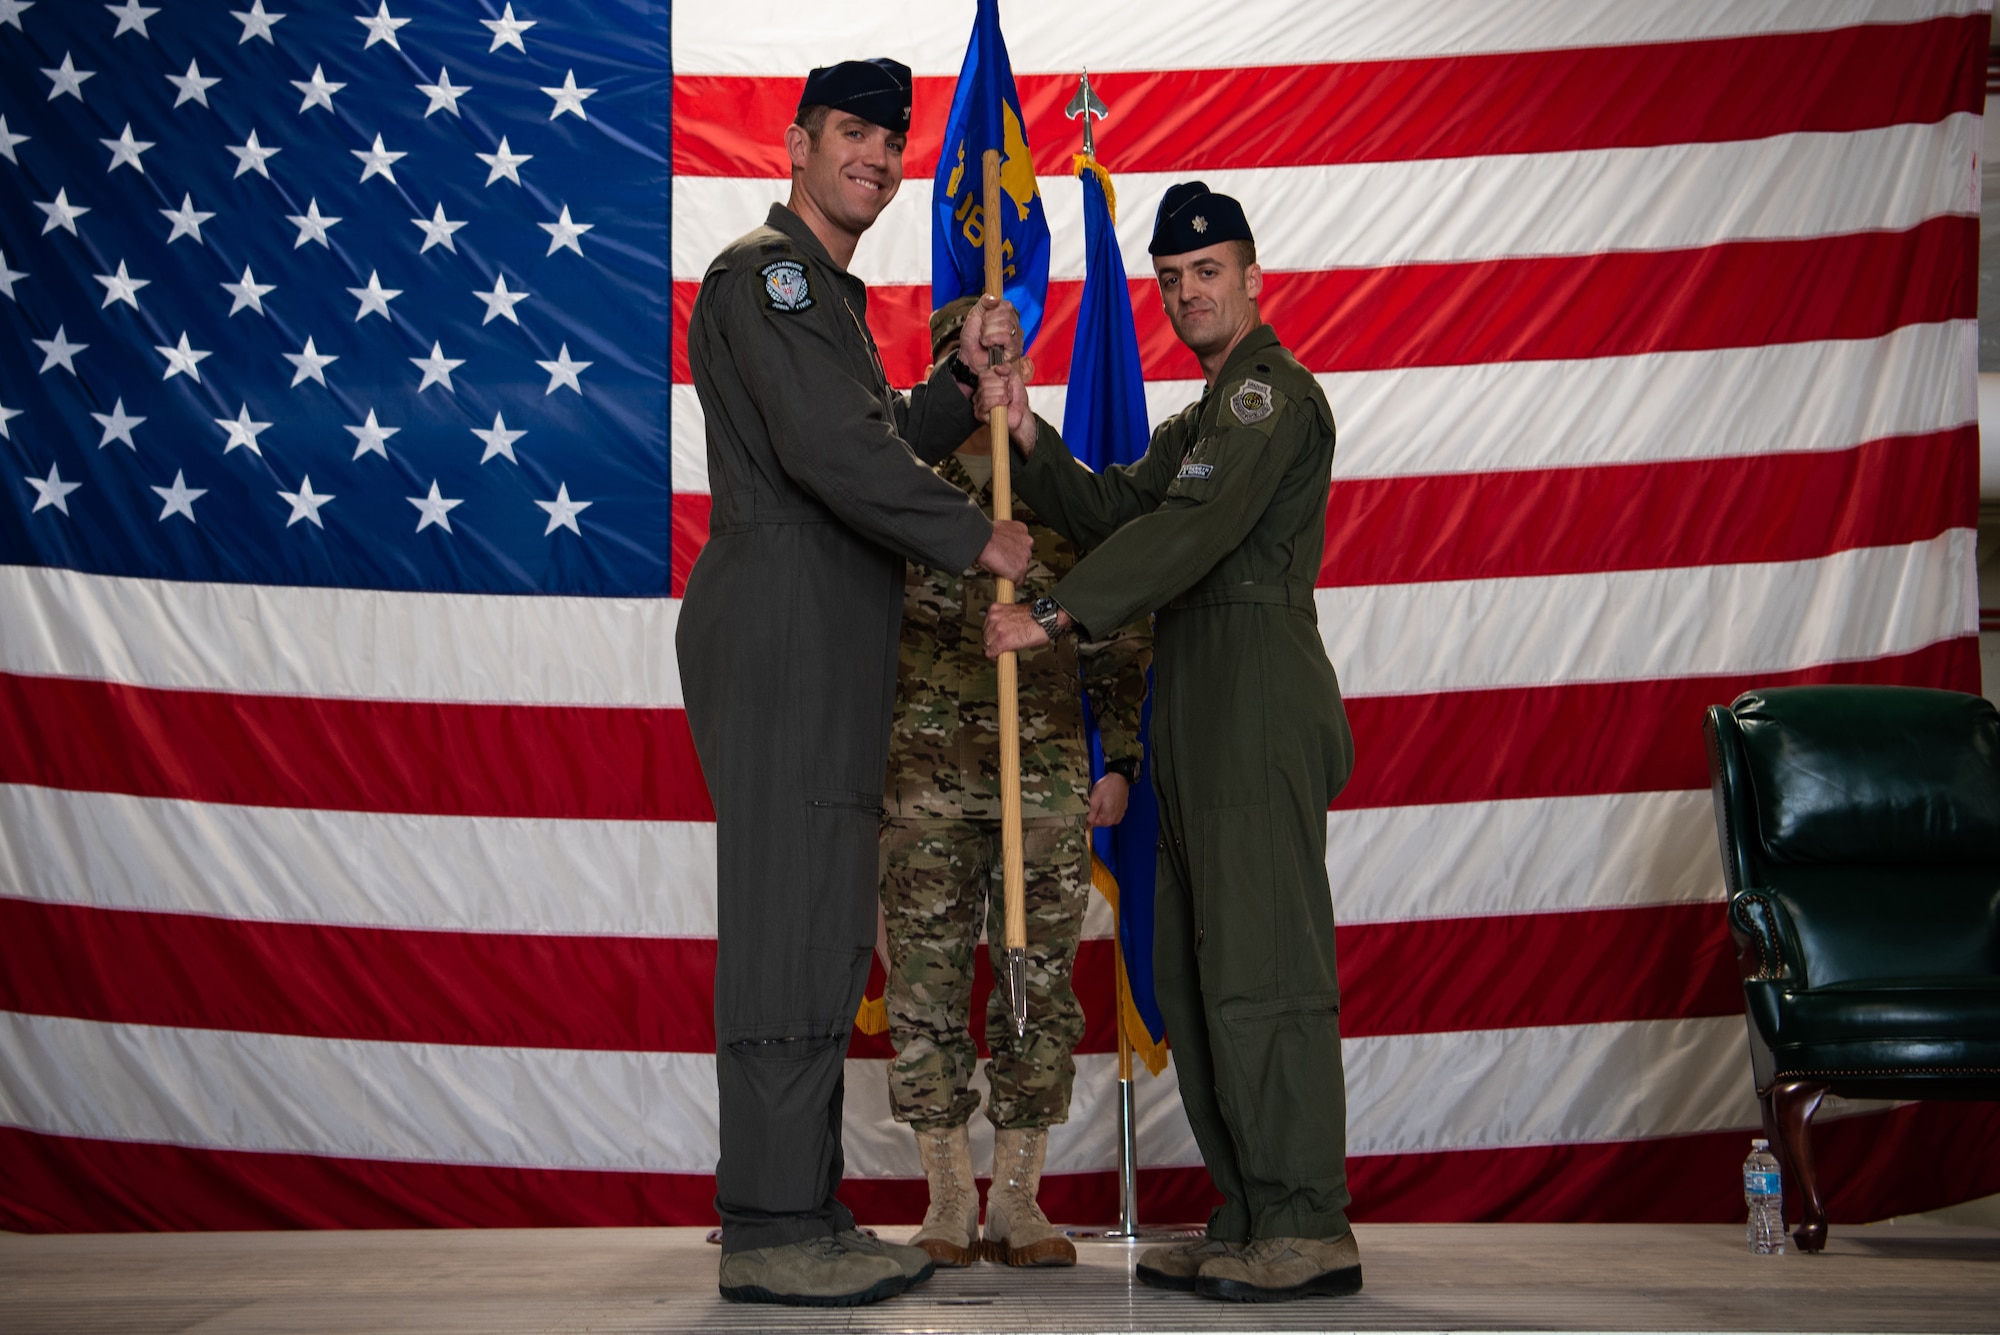 Col. Mathew Renbarger, 56th Operations Group commander, passes the 308th Fighter Squadron guidon to Lt. Col. Robert Miller, 308th Fighter Squadron commander, during an assumption of command ceremony, Nov. 30, 2018 at Luke Air Force Base, Ariz.